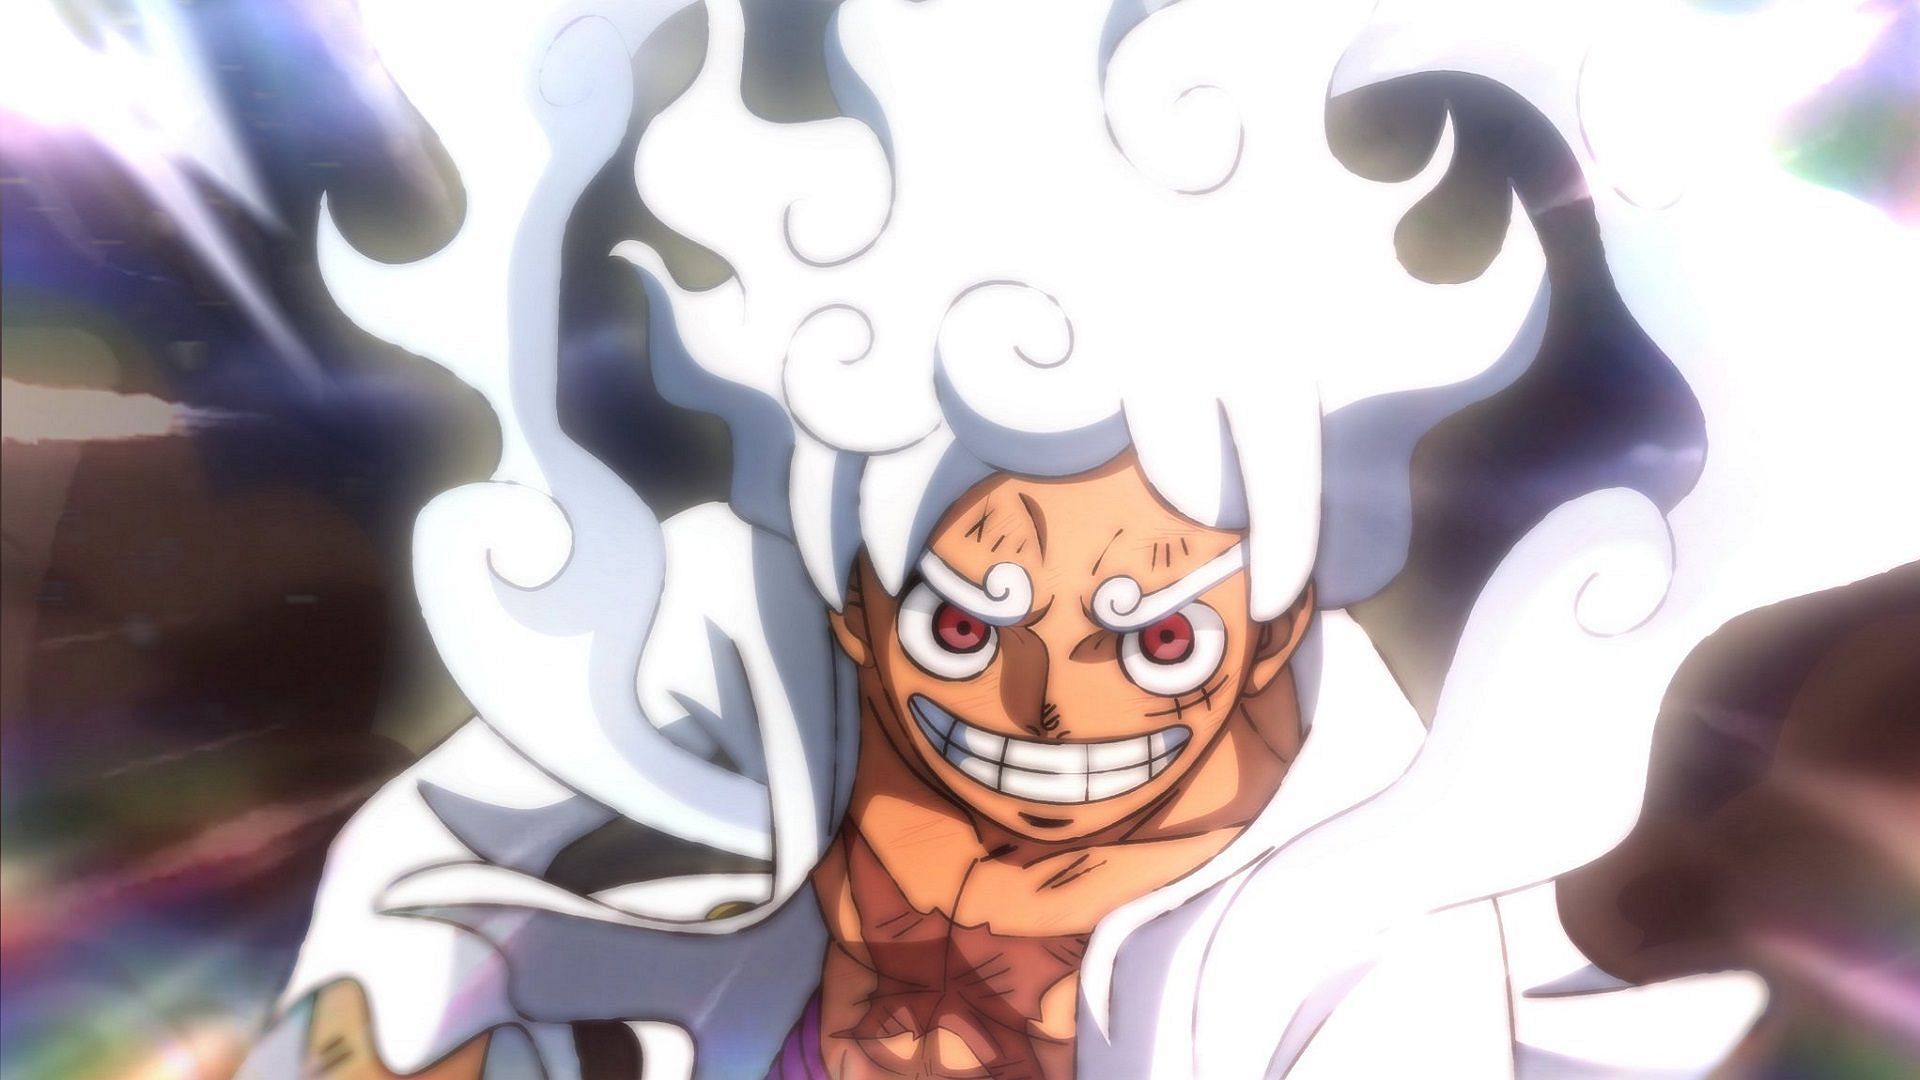 One Piece Promo Brings the Anime Closer to Gear 5 Luffy's Debut